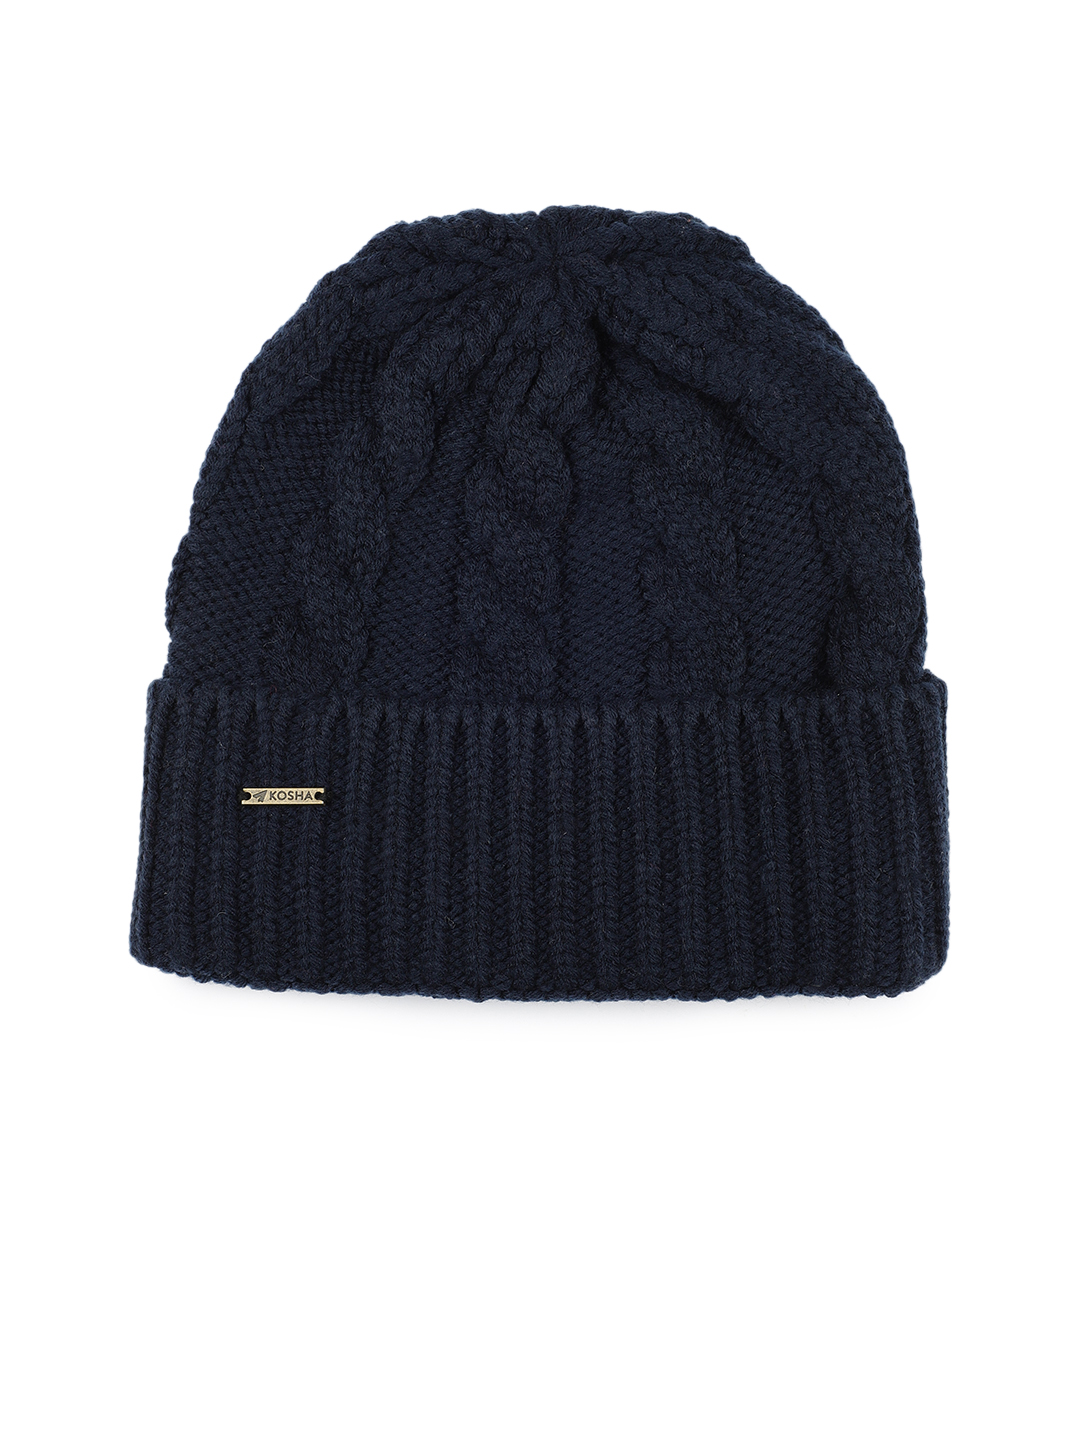 Navy Blue Acrylic Wool Cable Knit Winter Beanie | Men